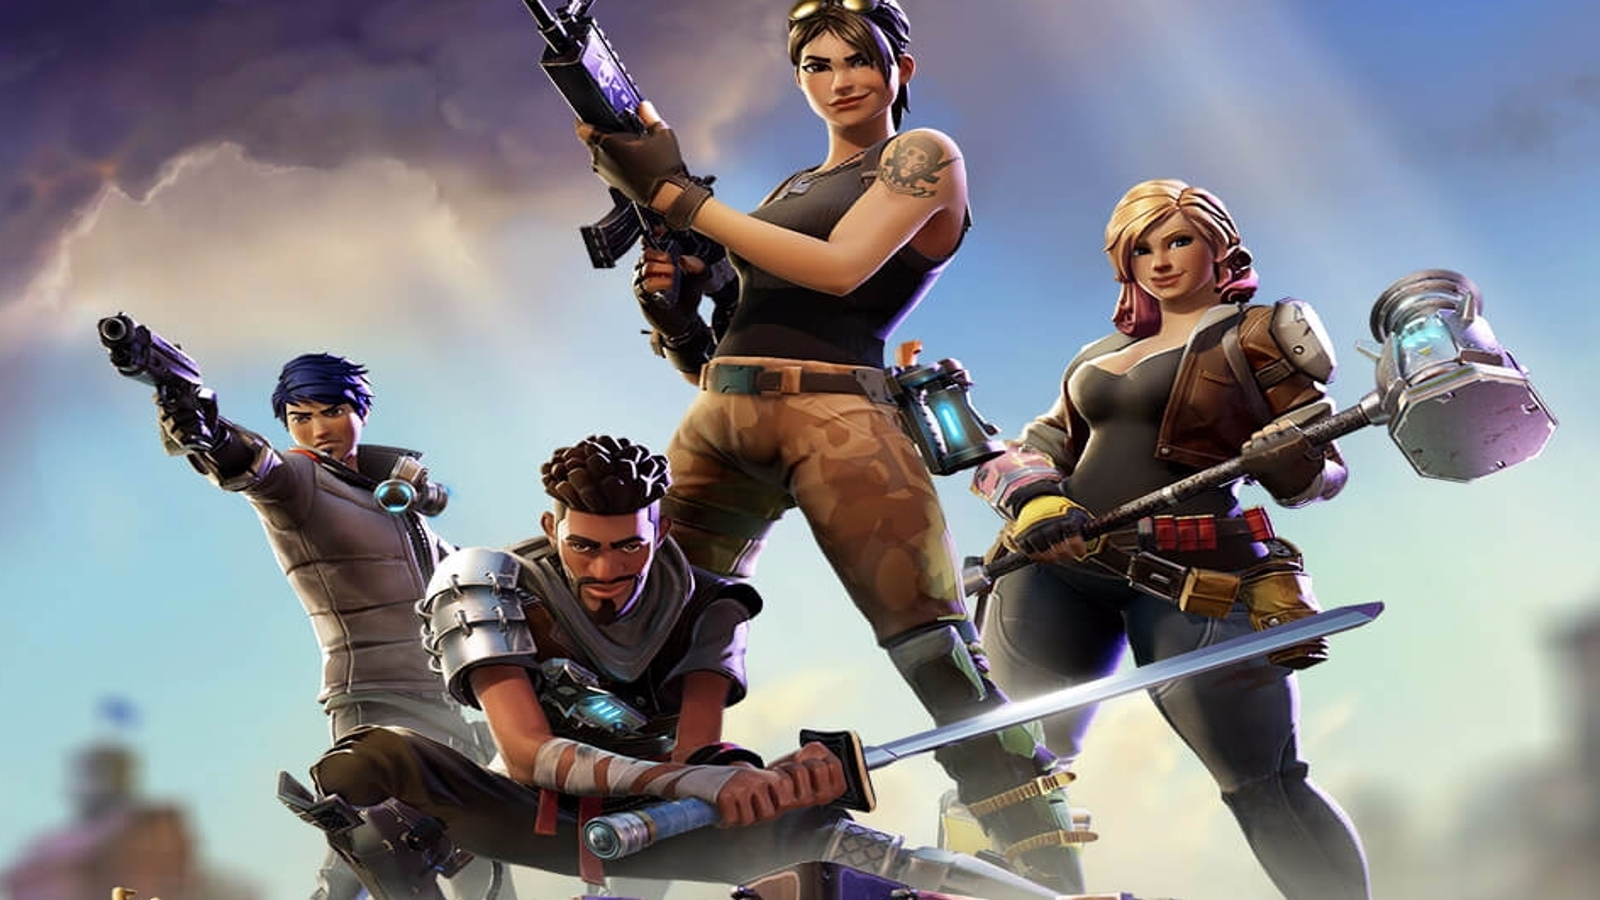 Fortnite's battle royale mode hits 10m players in two weeks - MCV/DEVELOP